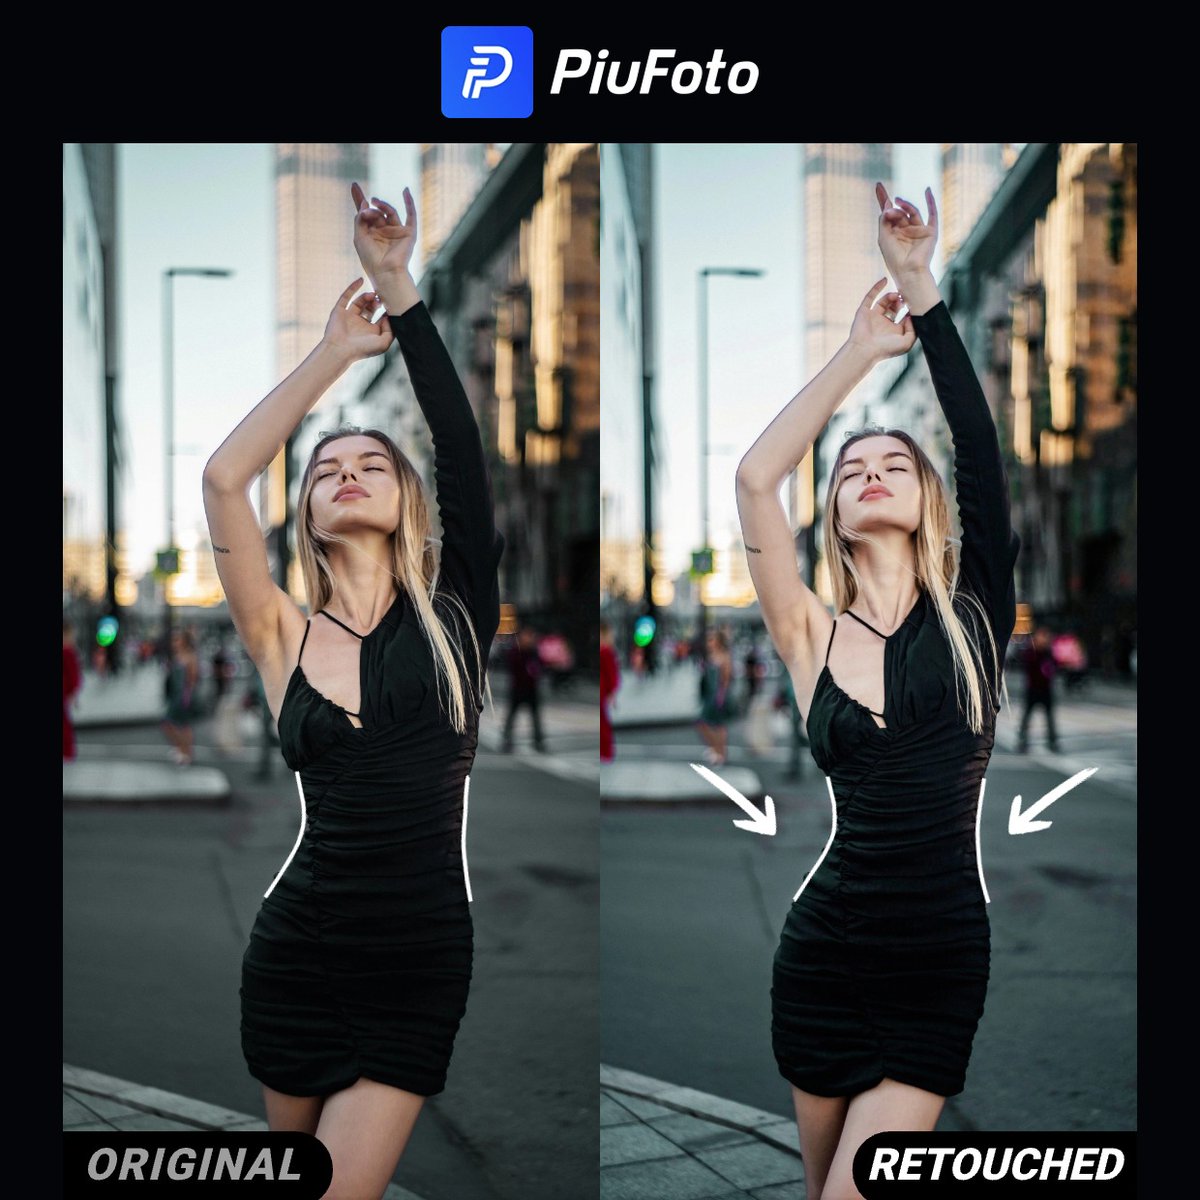 📸Our brand Piufoto focuses on picture live broadcast, real-time transmission, cloud storage, and AI Retouching o help you create the perfect figure in your photos. #InstagramInnovations #AIEditing #PicturePerfect #LiveStreaming #CloudStorage #InfluencerEssentials #socialmedia